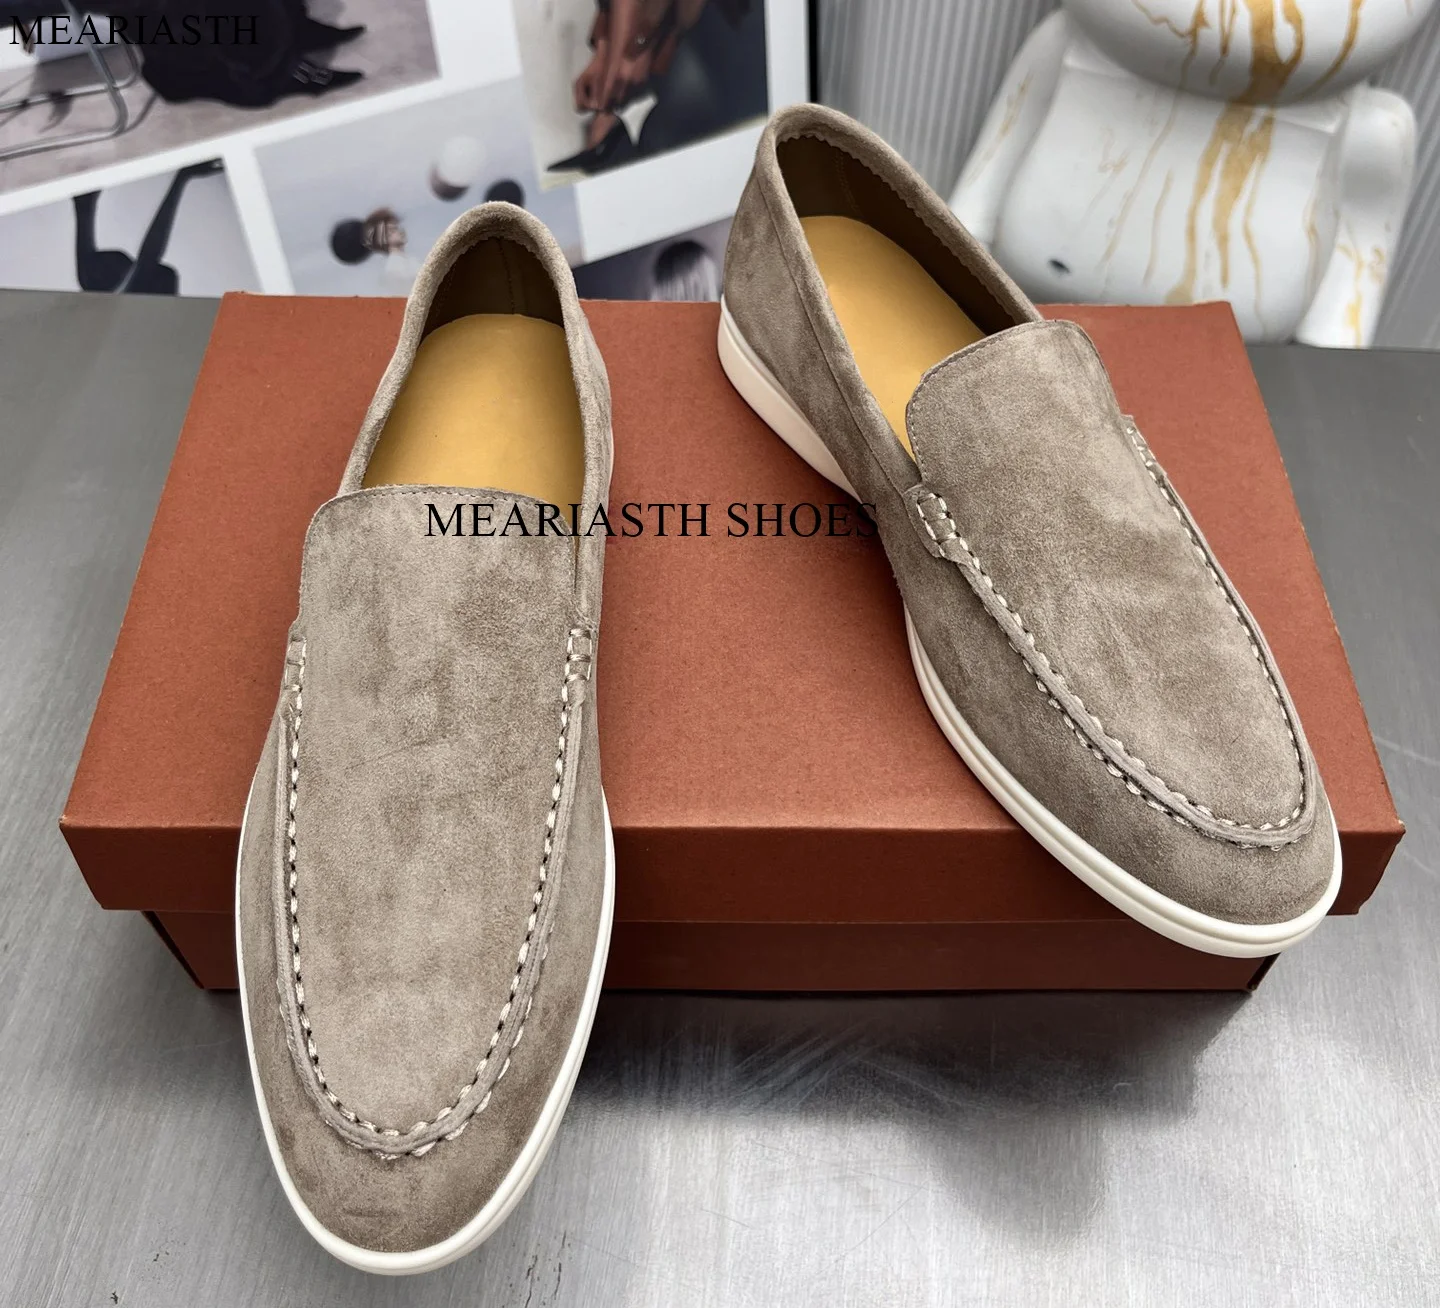 

Kid Suede Men's Loafers Lady Summer Walk Shoes Women Flats Soft Sole Comfortable Slip on Casual Moccasins Driving Beanie Shoes